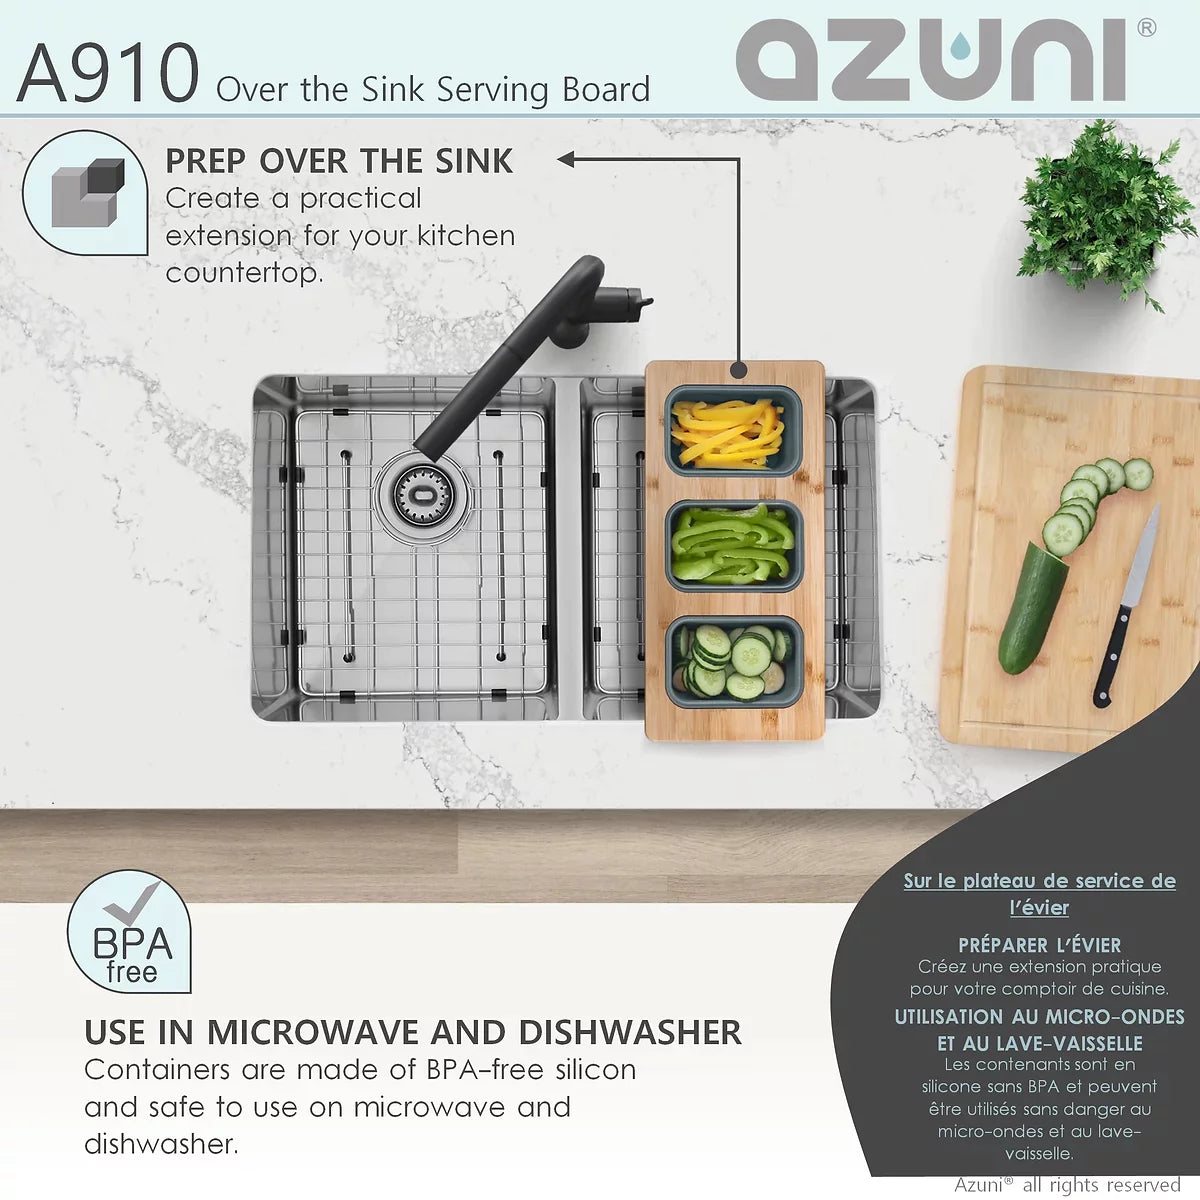 Stylish Azuni 18" Kitchen Sink Bamboo Serving Board Set With 3 Containers A910